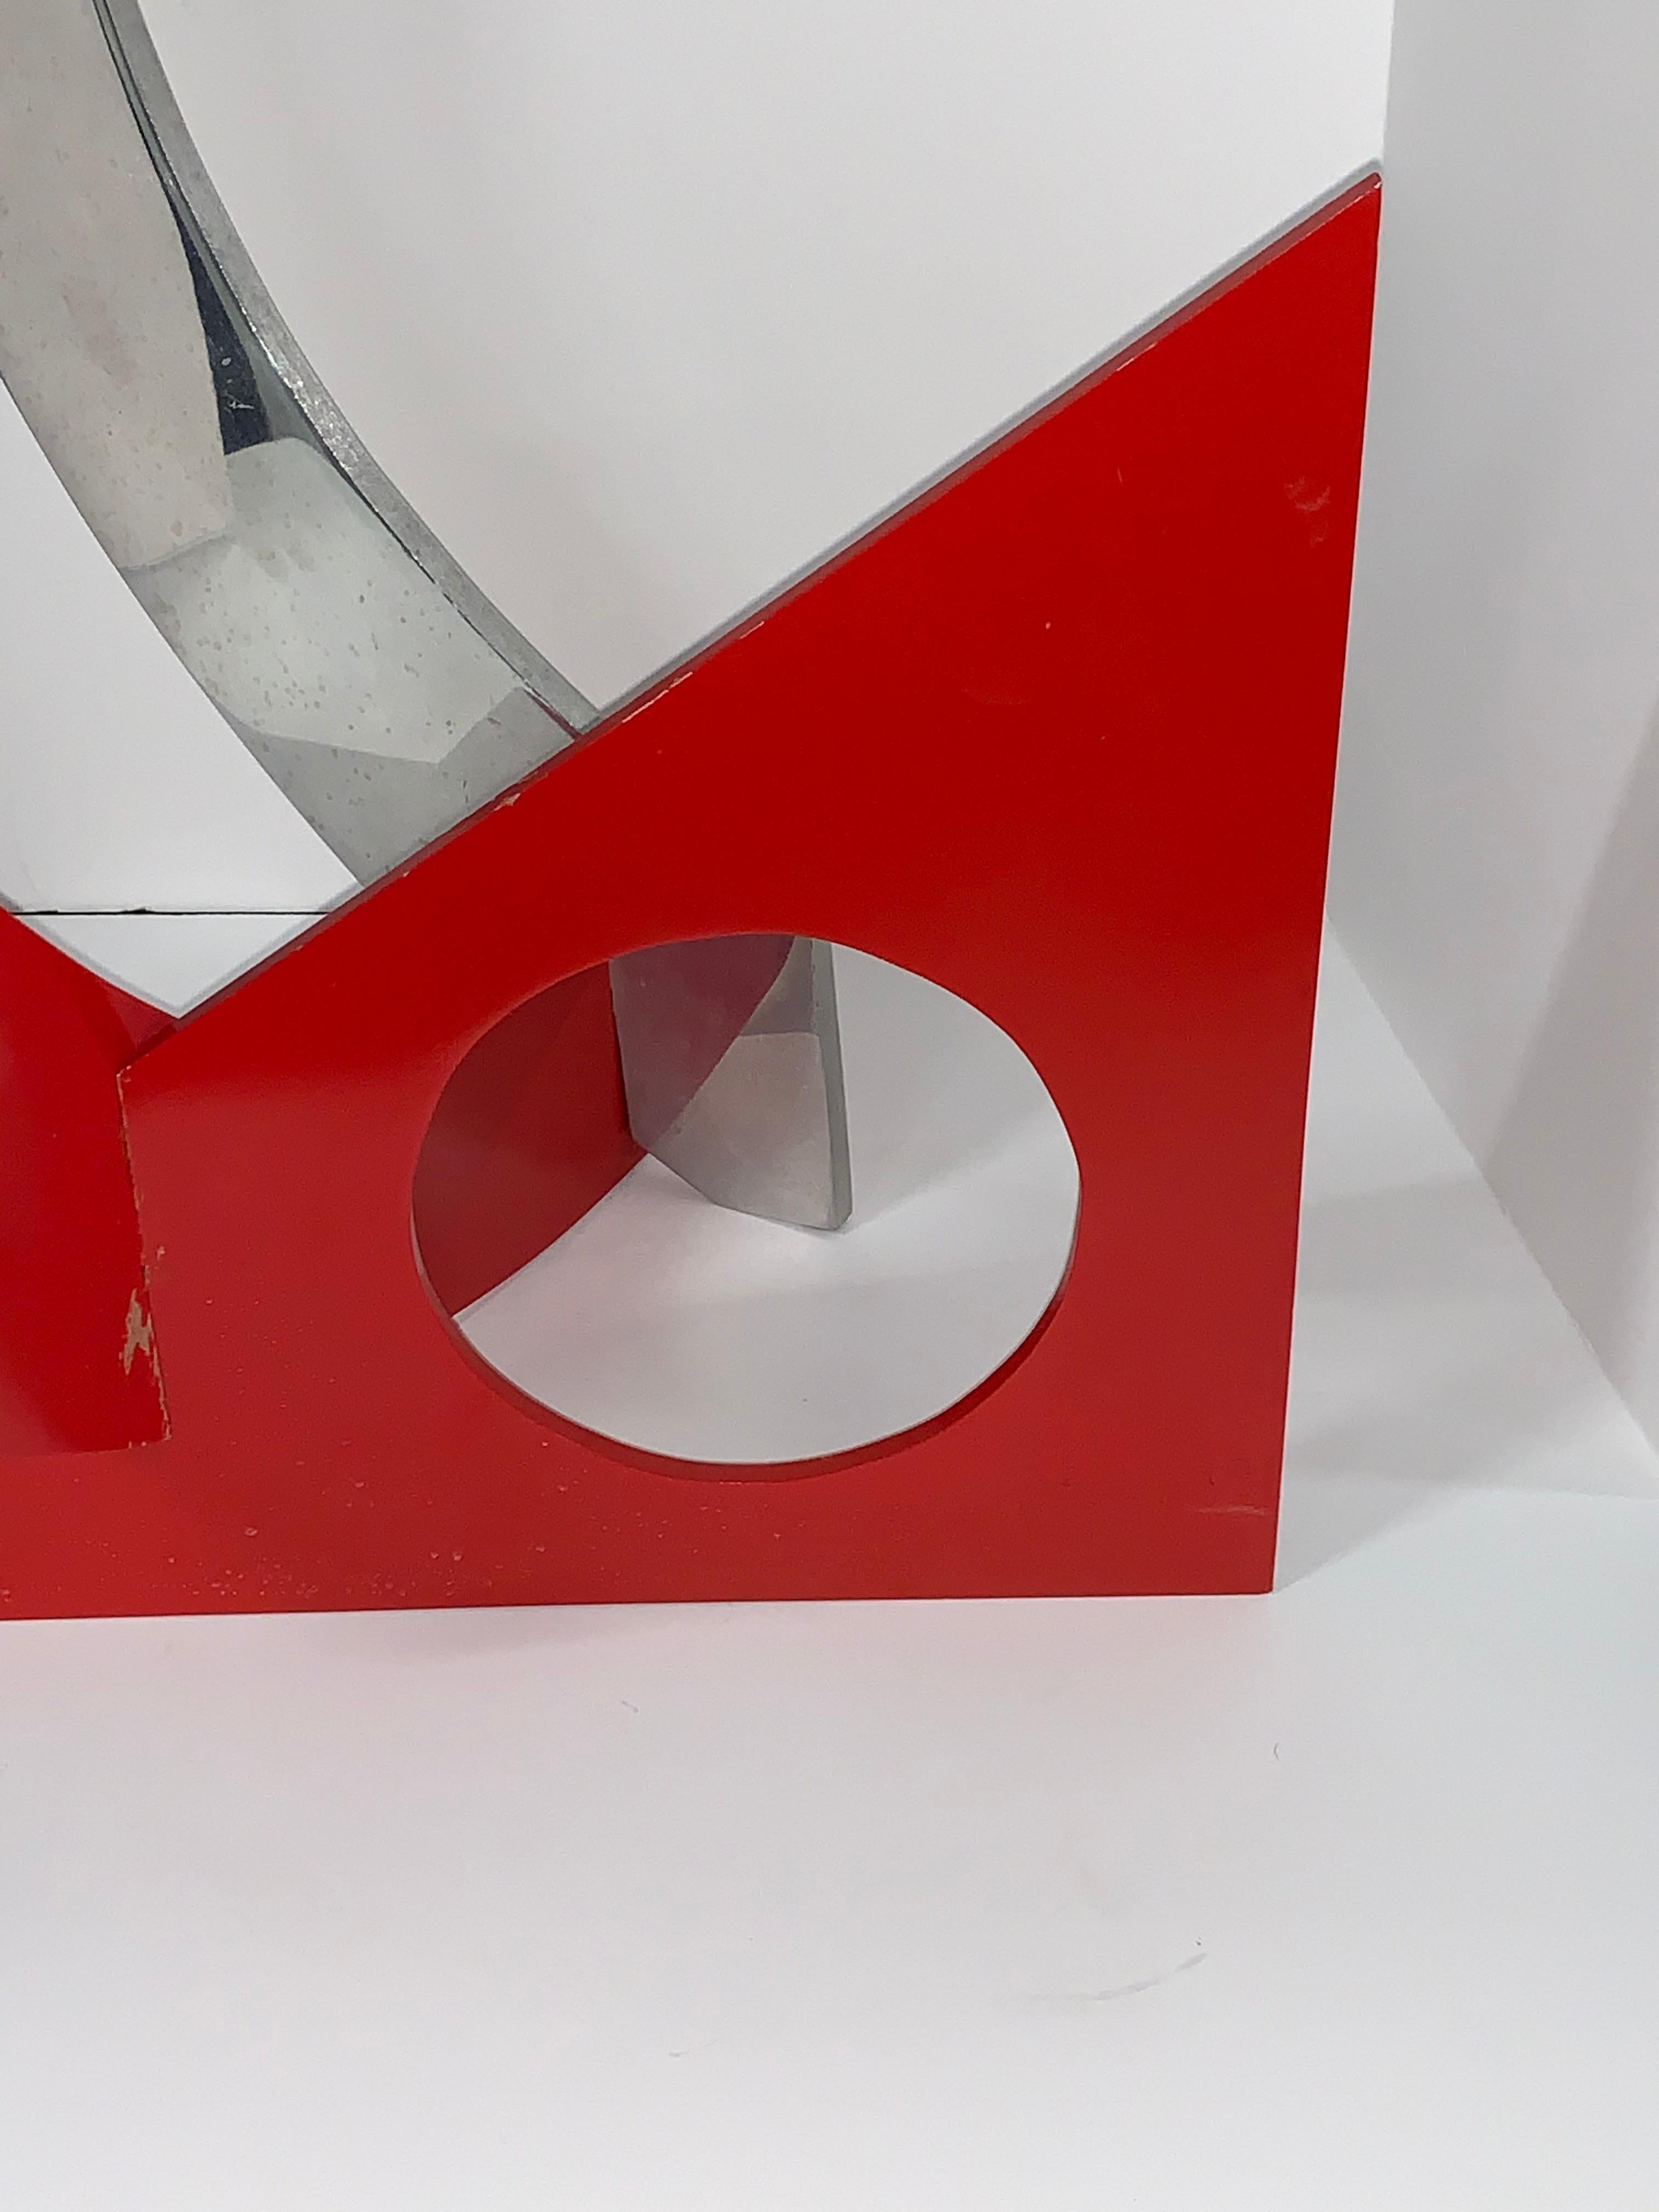 1990 Aluminum Frank Riggs Geometric Sculpture In Good Condition For Sale In Palm Springs, CA